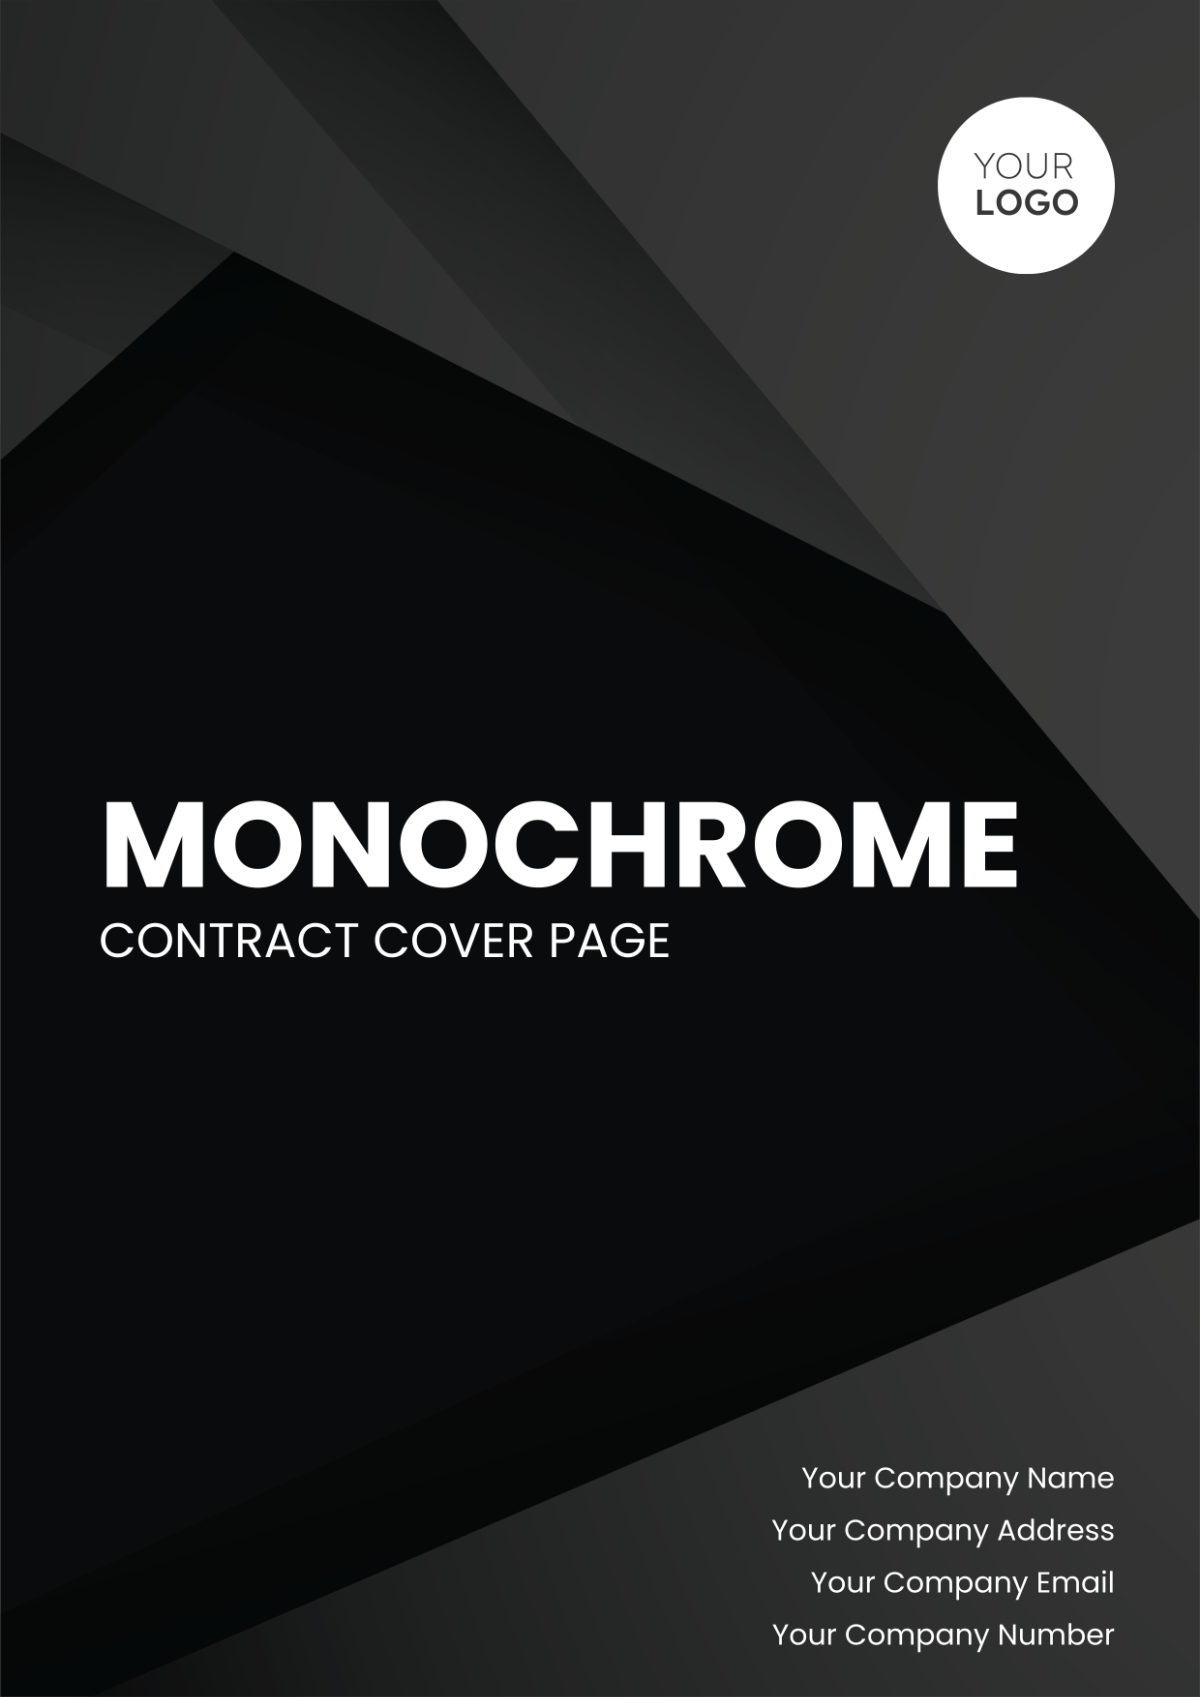 Monochrome Contract Cover Page